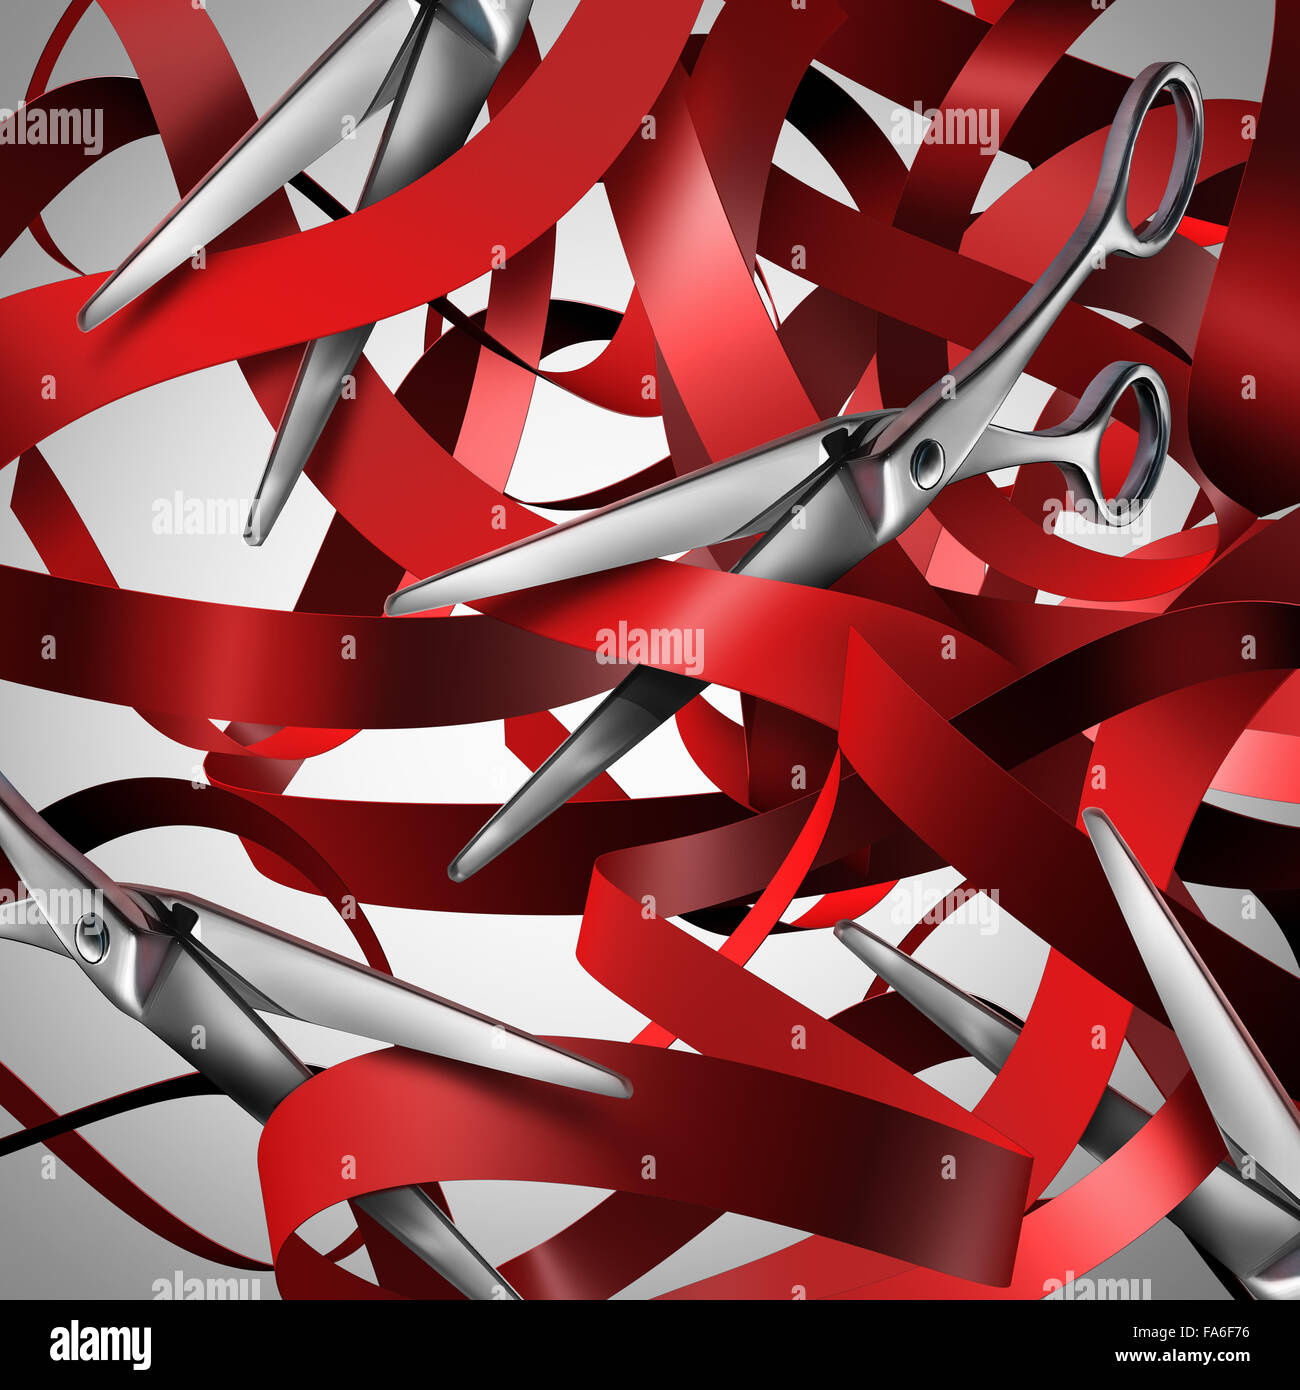 Cutting red tape and bureaucracy obstacle business concept as a group of scissors making cuts to symbols of government gridlock Stock Photo